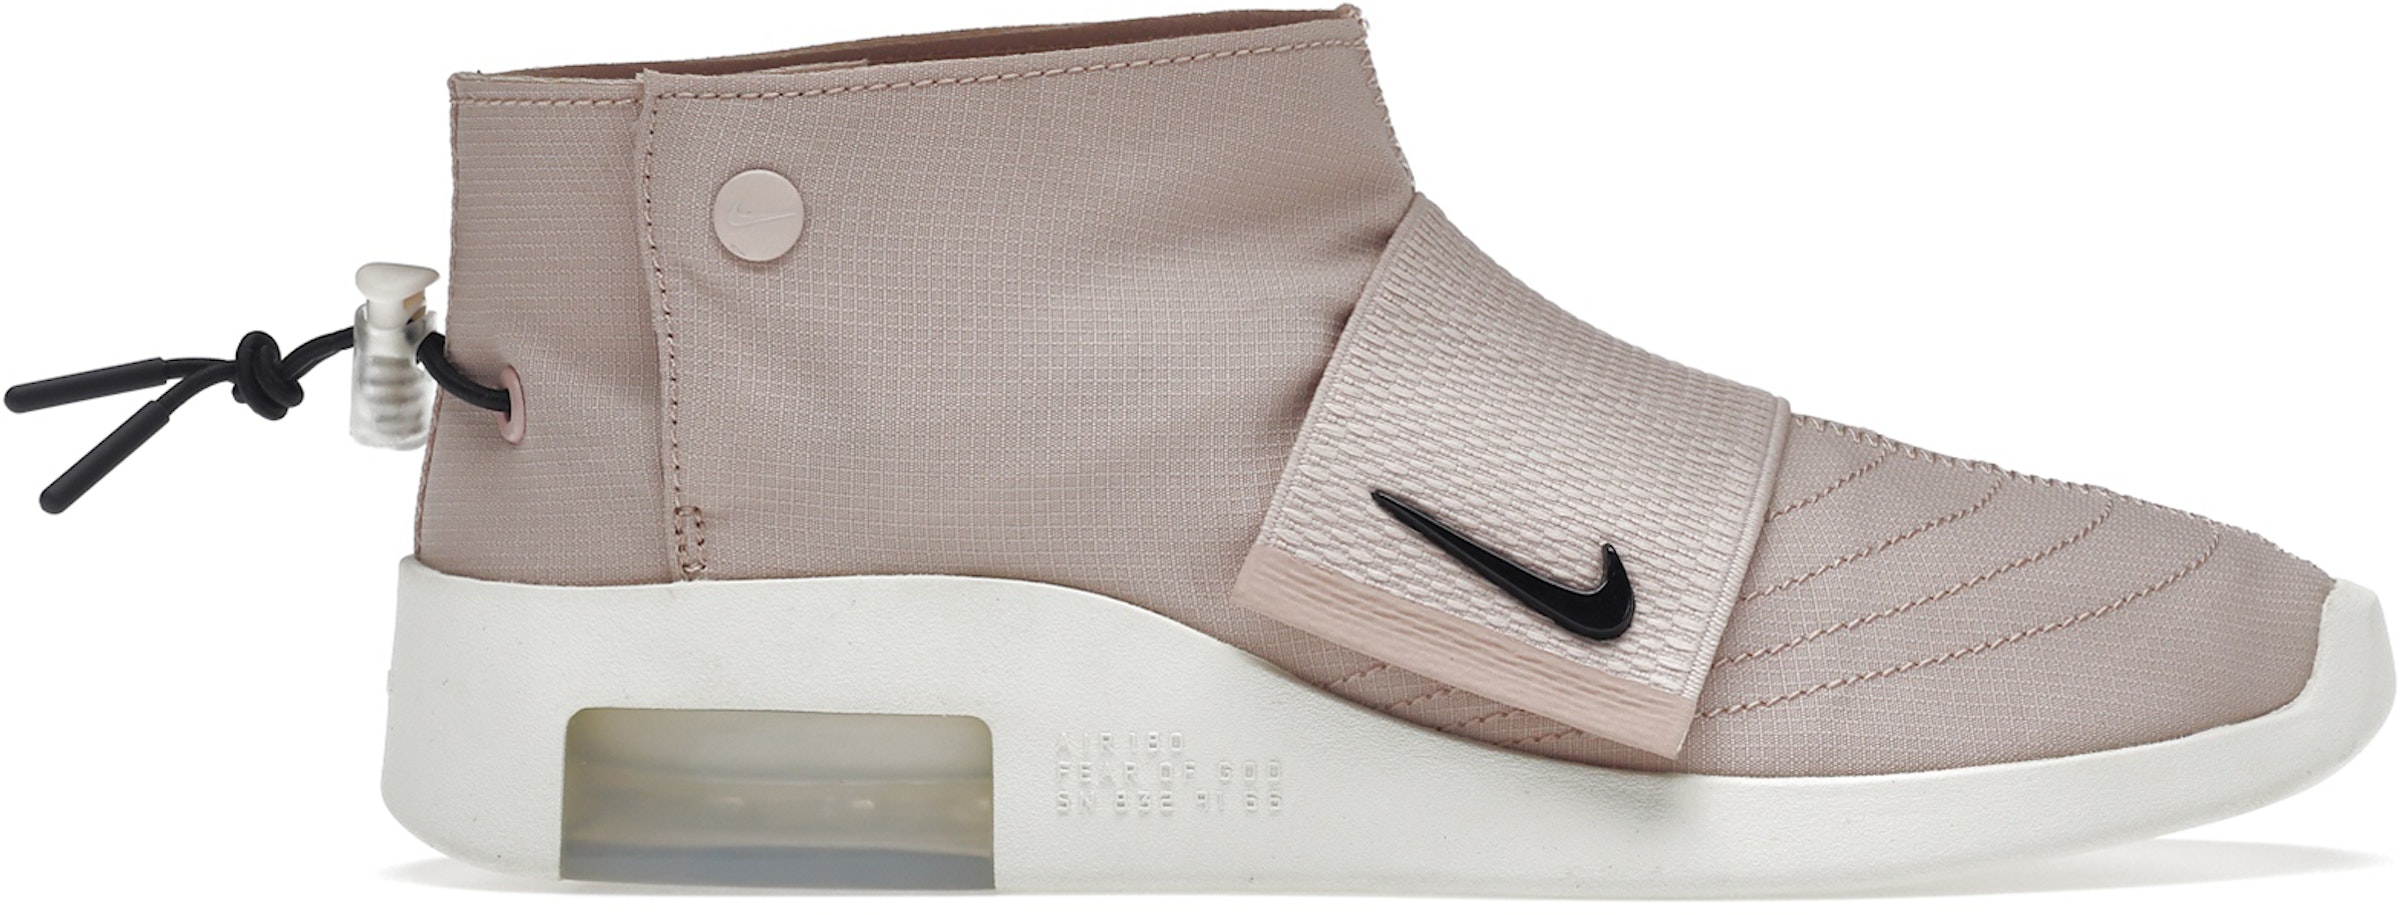 Nike Air Fear God Moccasin Particle Beige Men's - AT8086-200 - US